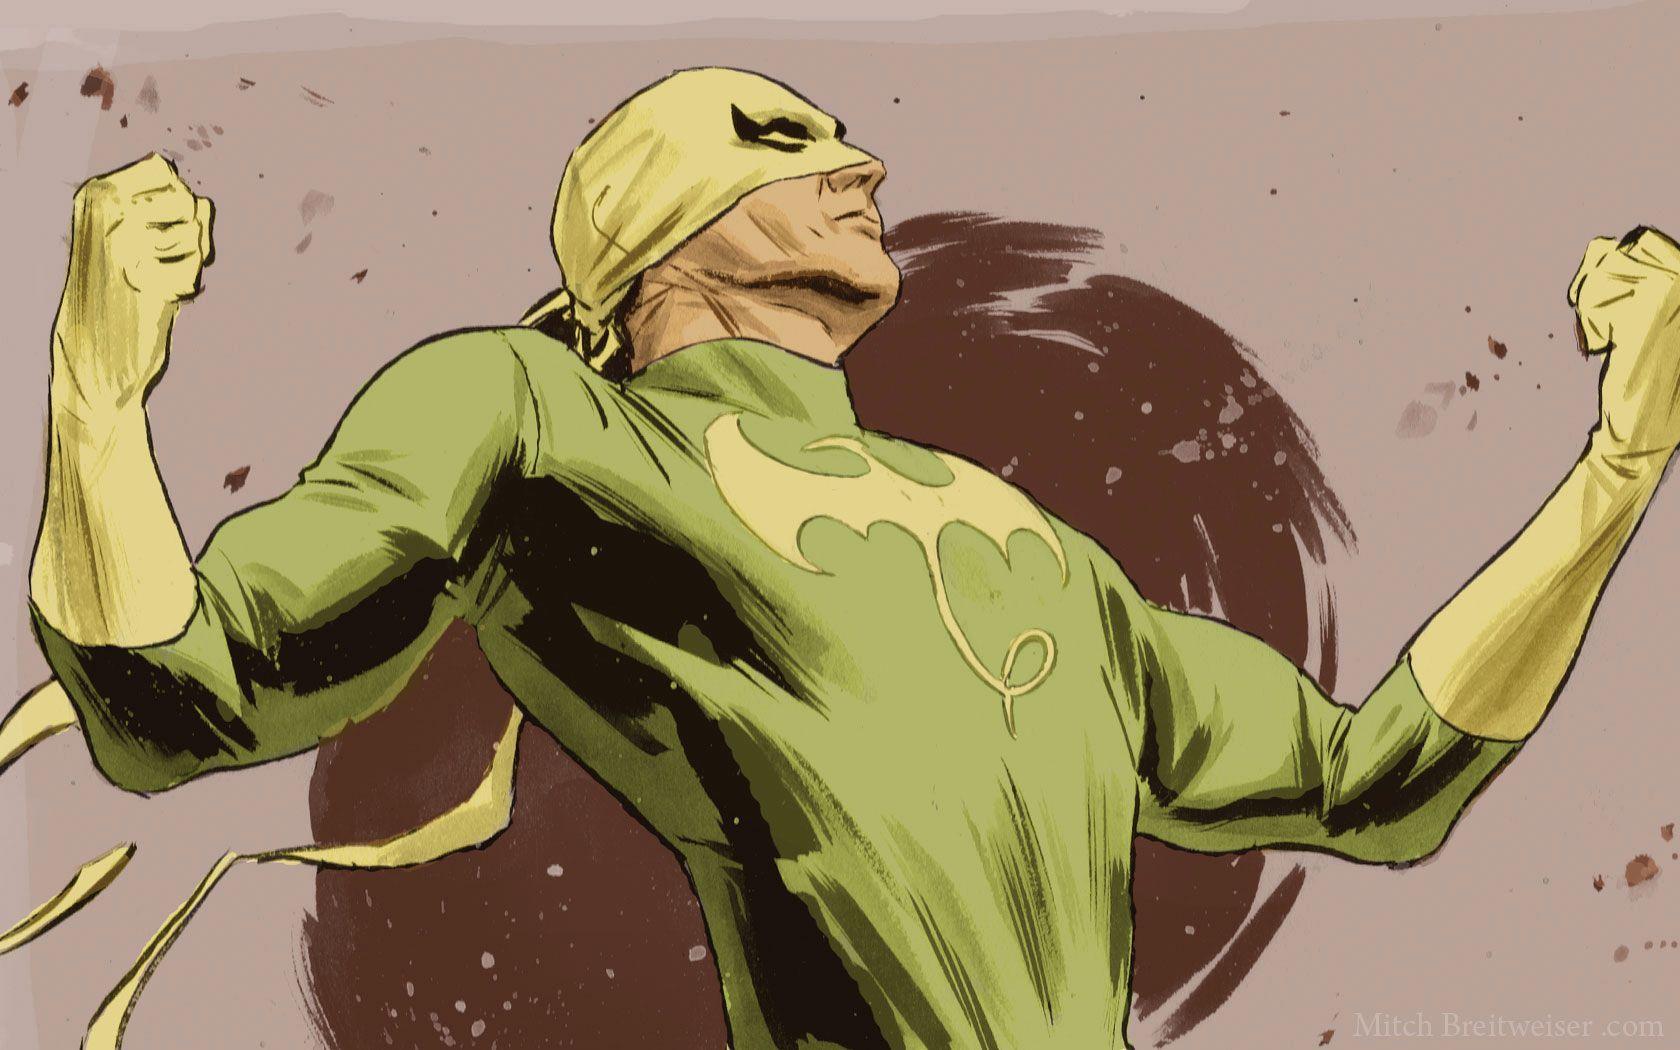 Game Of Thrones' Star Cast As 'Iron Fist' In Marvel's New Netflix